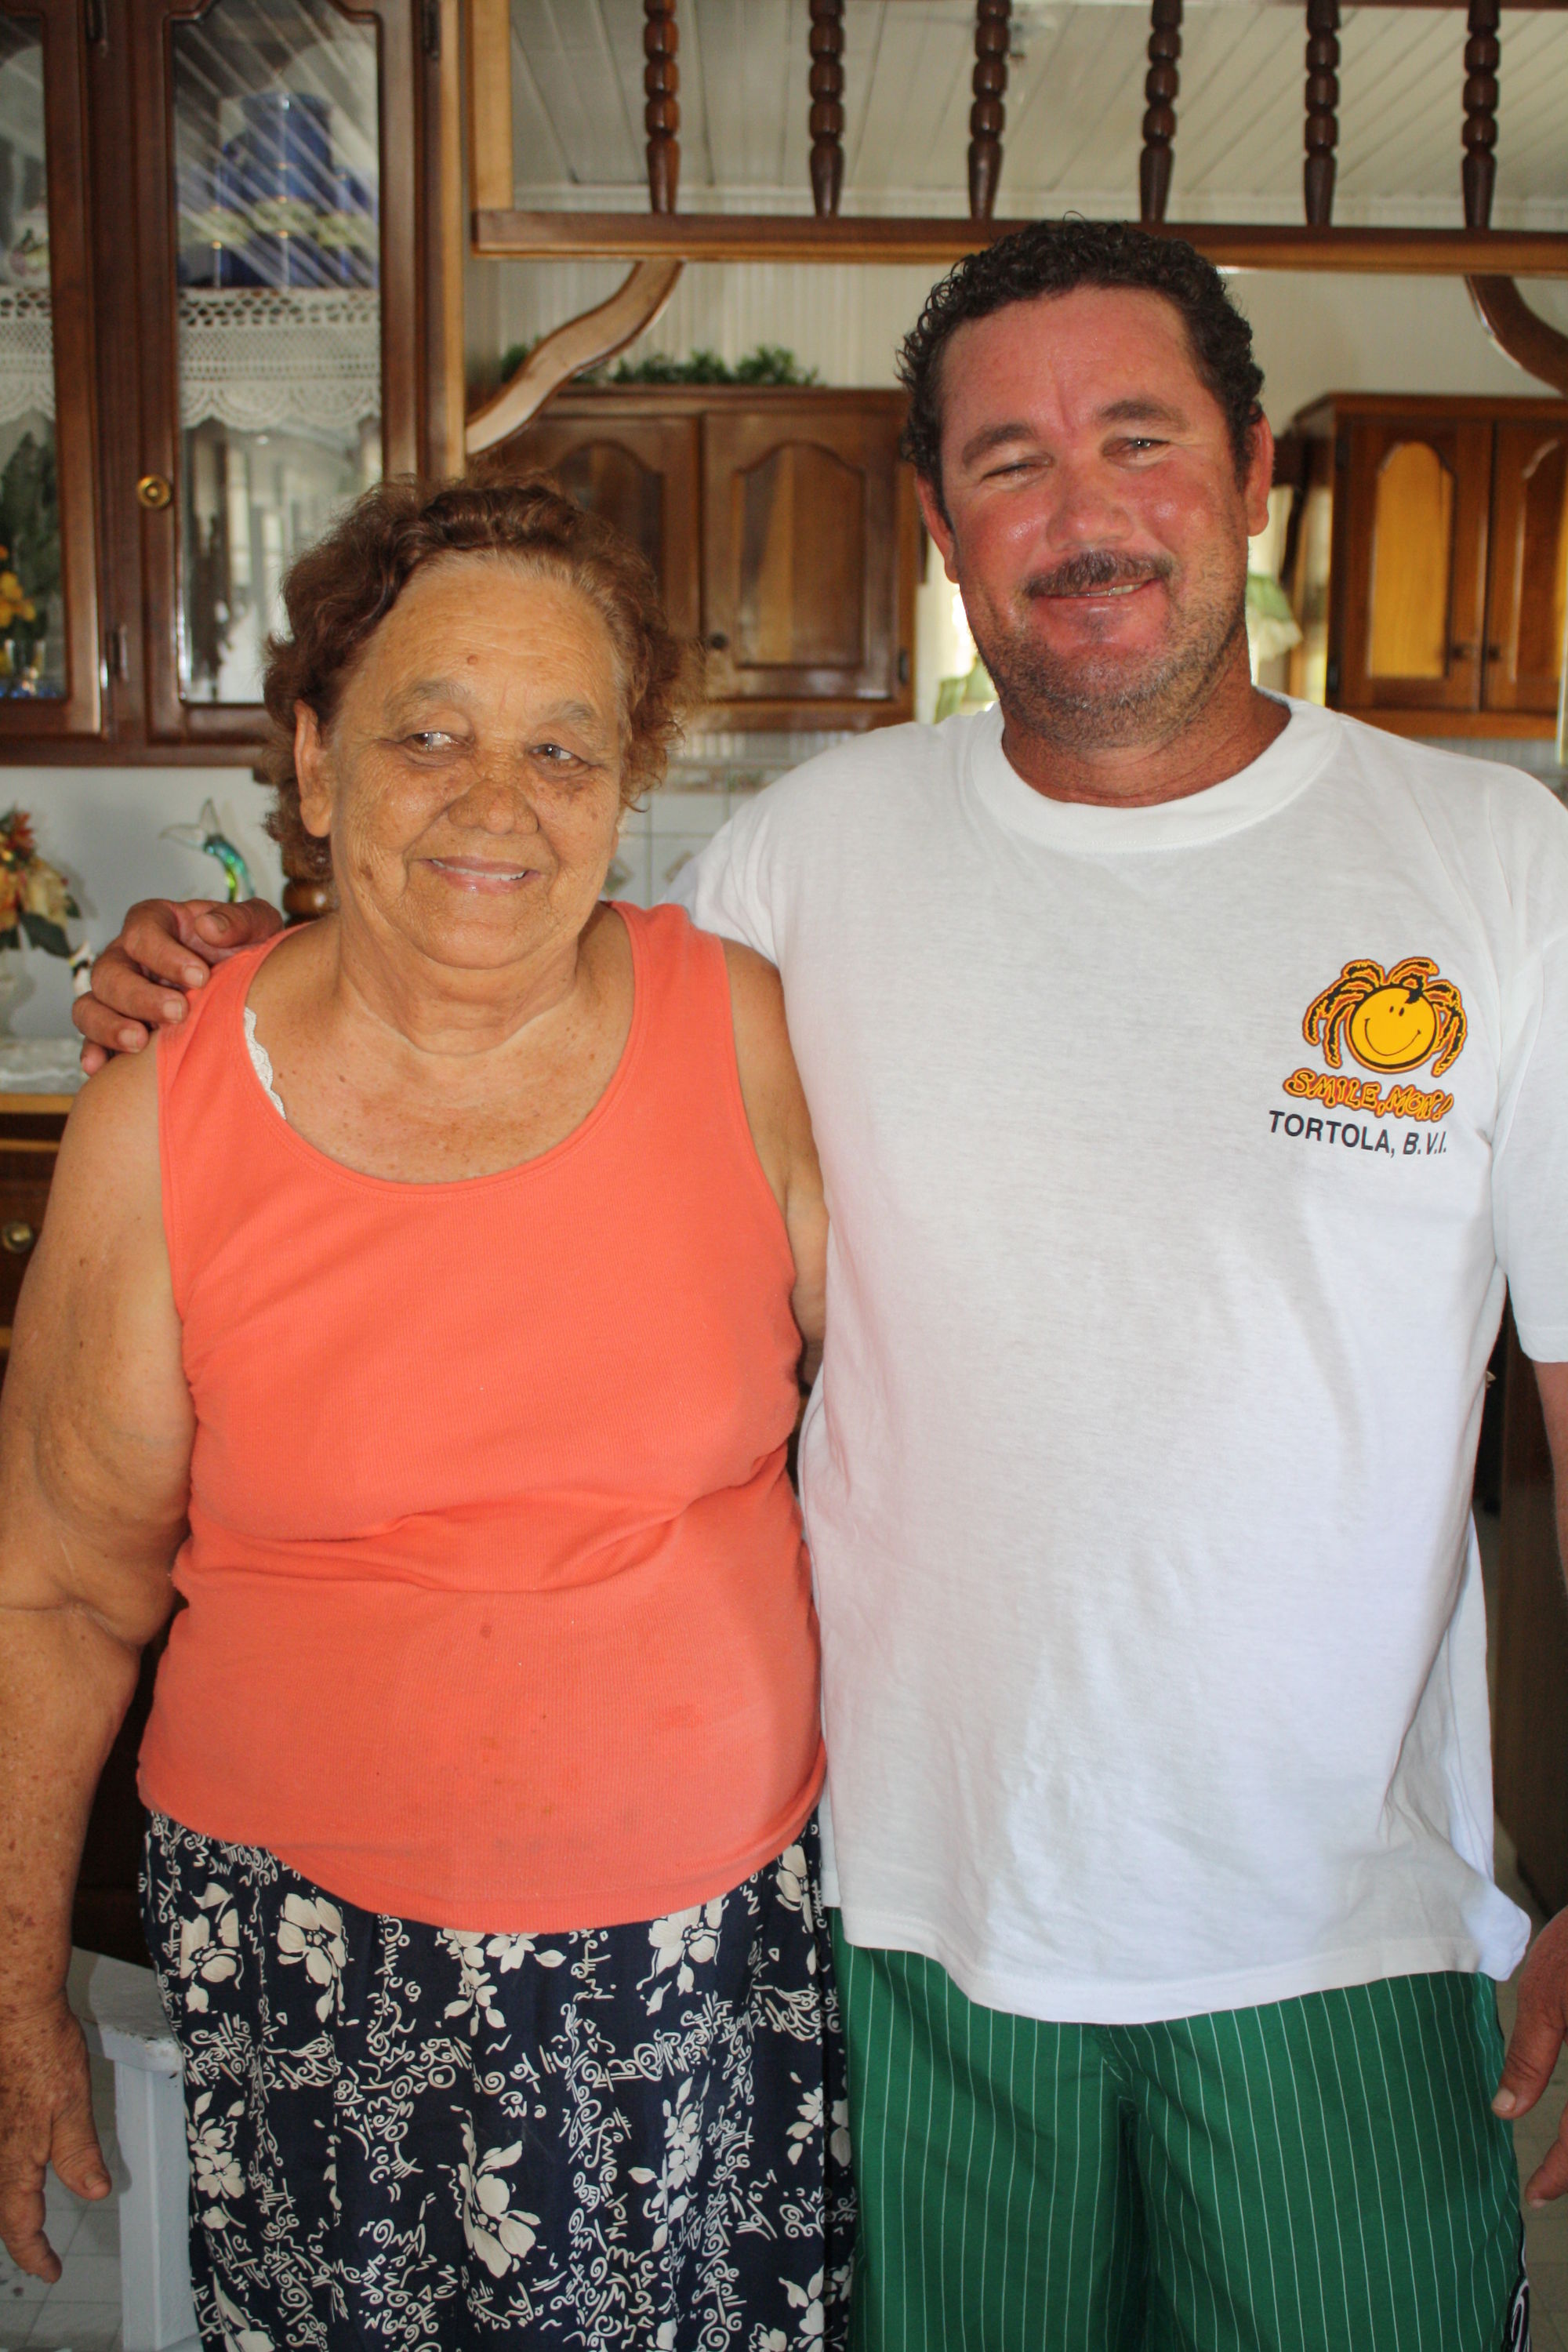 Cary Bush and his Mother, who cooks like a dream